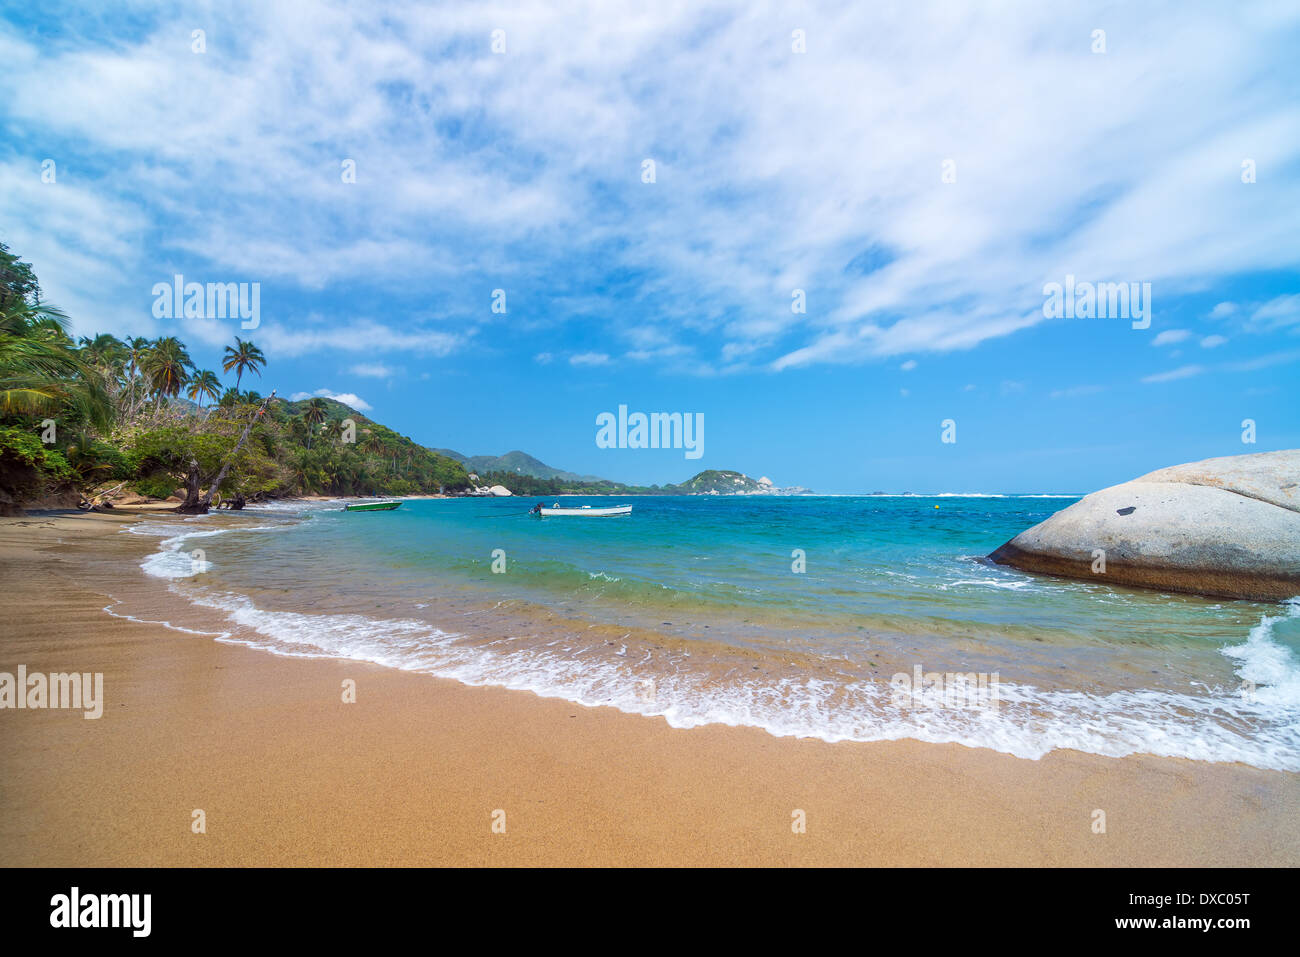 Tropical Caribbean beach in Tayrona National Park in Colombia Stock Photo